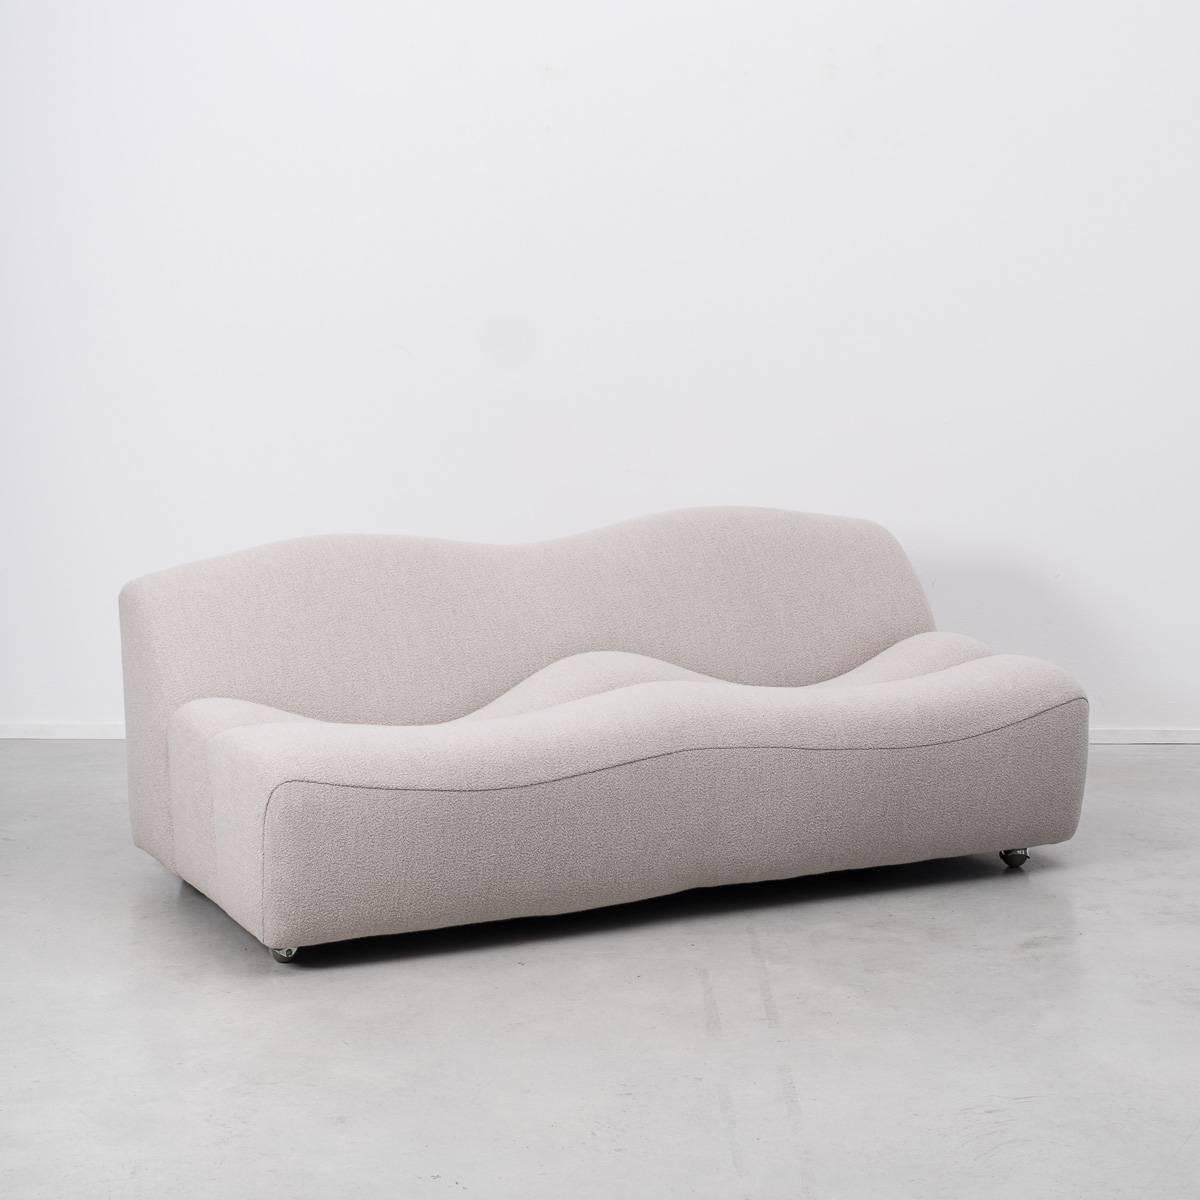 The ABCD sofa by Pierre Paulin is iconic due to its inviting and undulating form. Its design inspiration came from the familiar household object, an egg box. The upholstered waves are made from foam on a fibreglass frame that sits on top of casters.